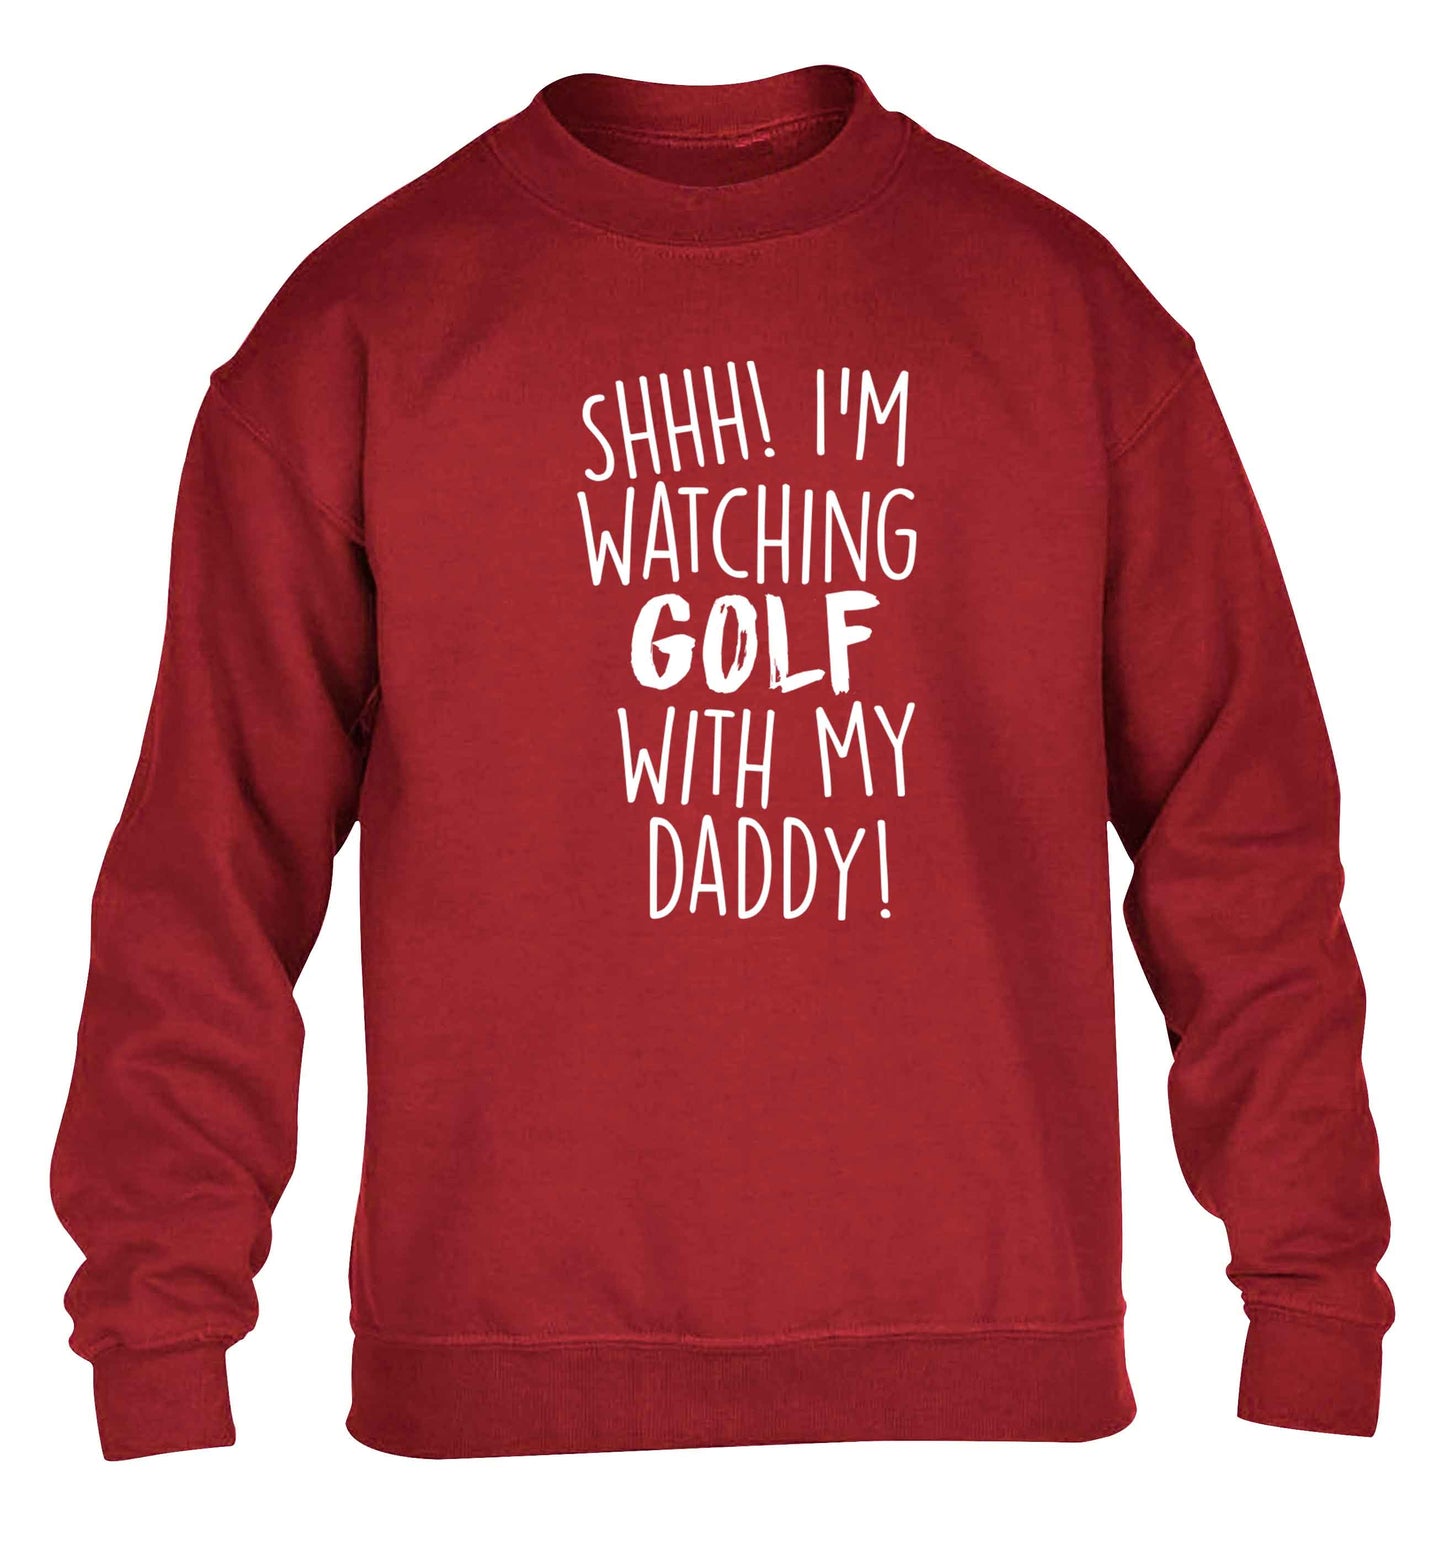 Shh I'm watching golf with my daddy children's grey sweater 12-13 Years